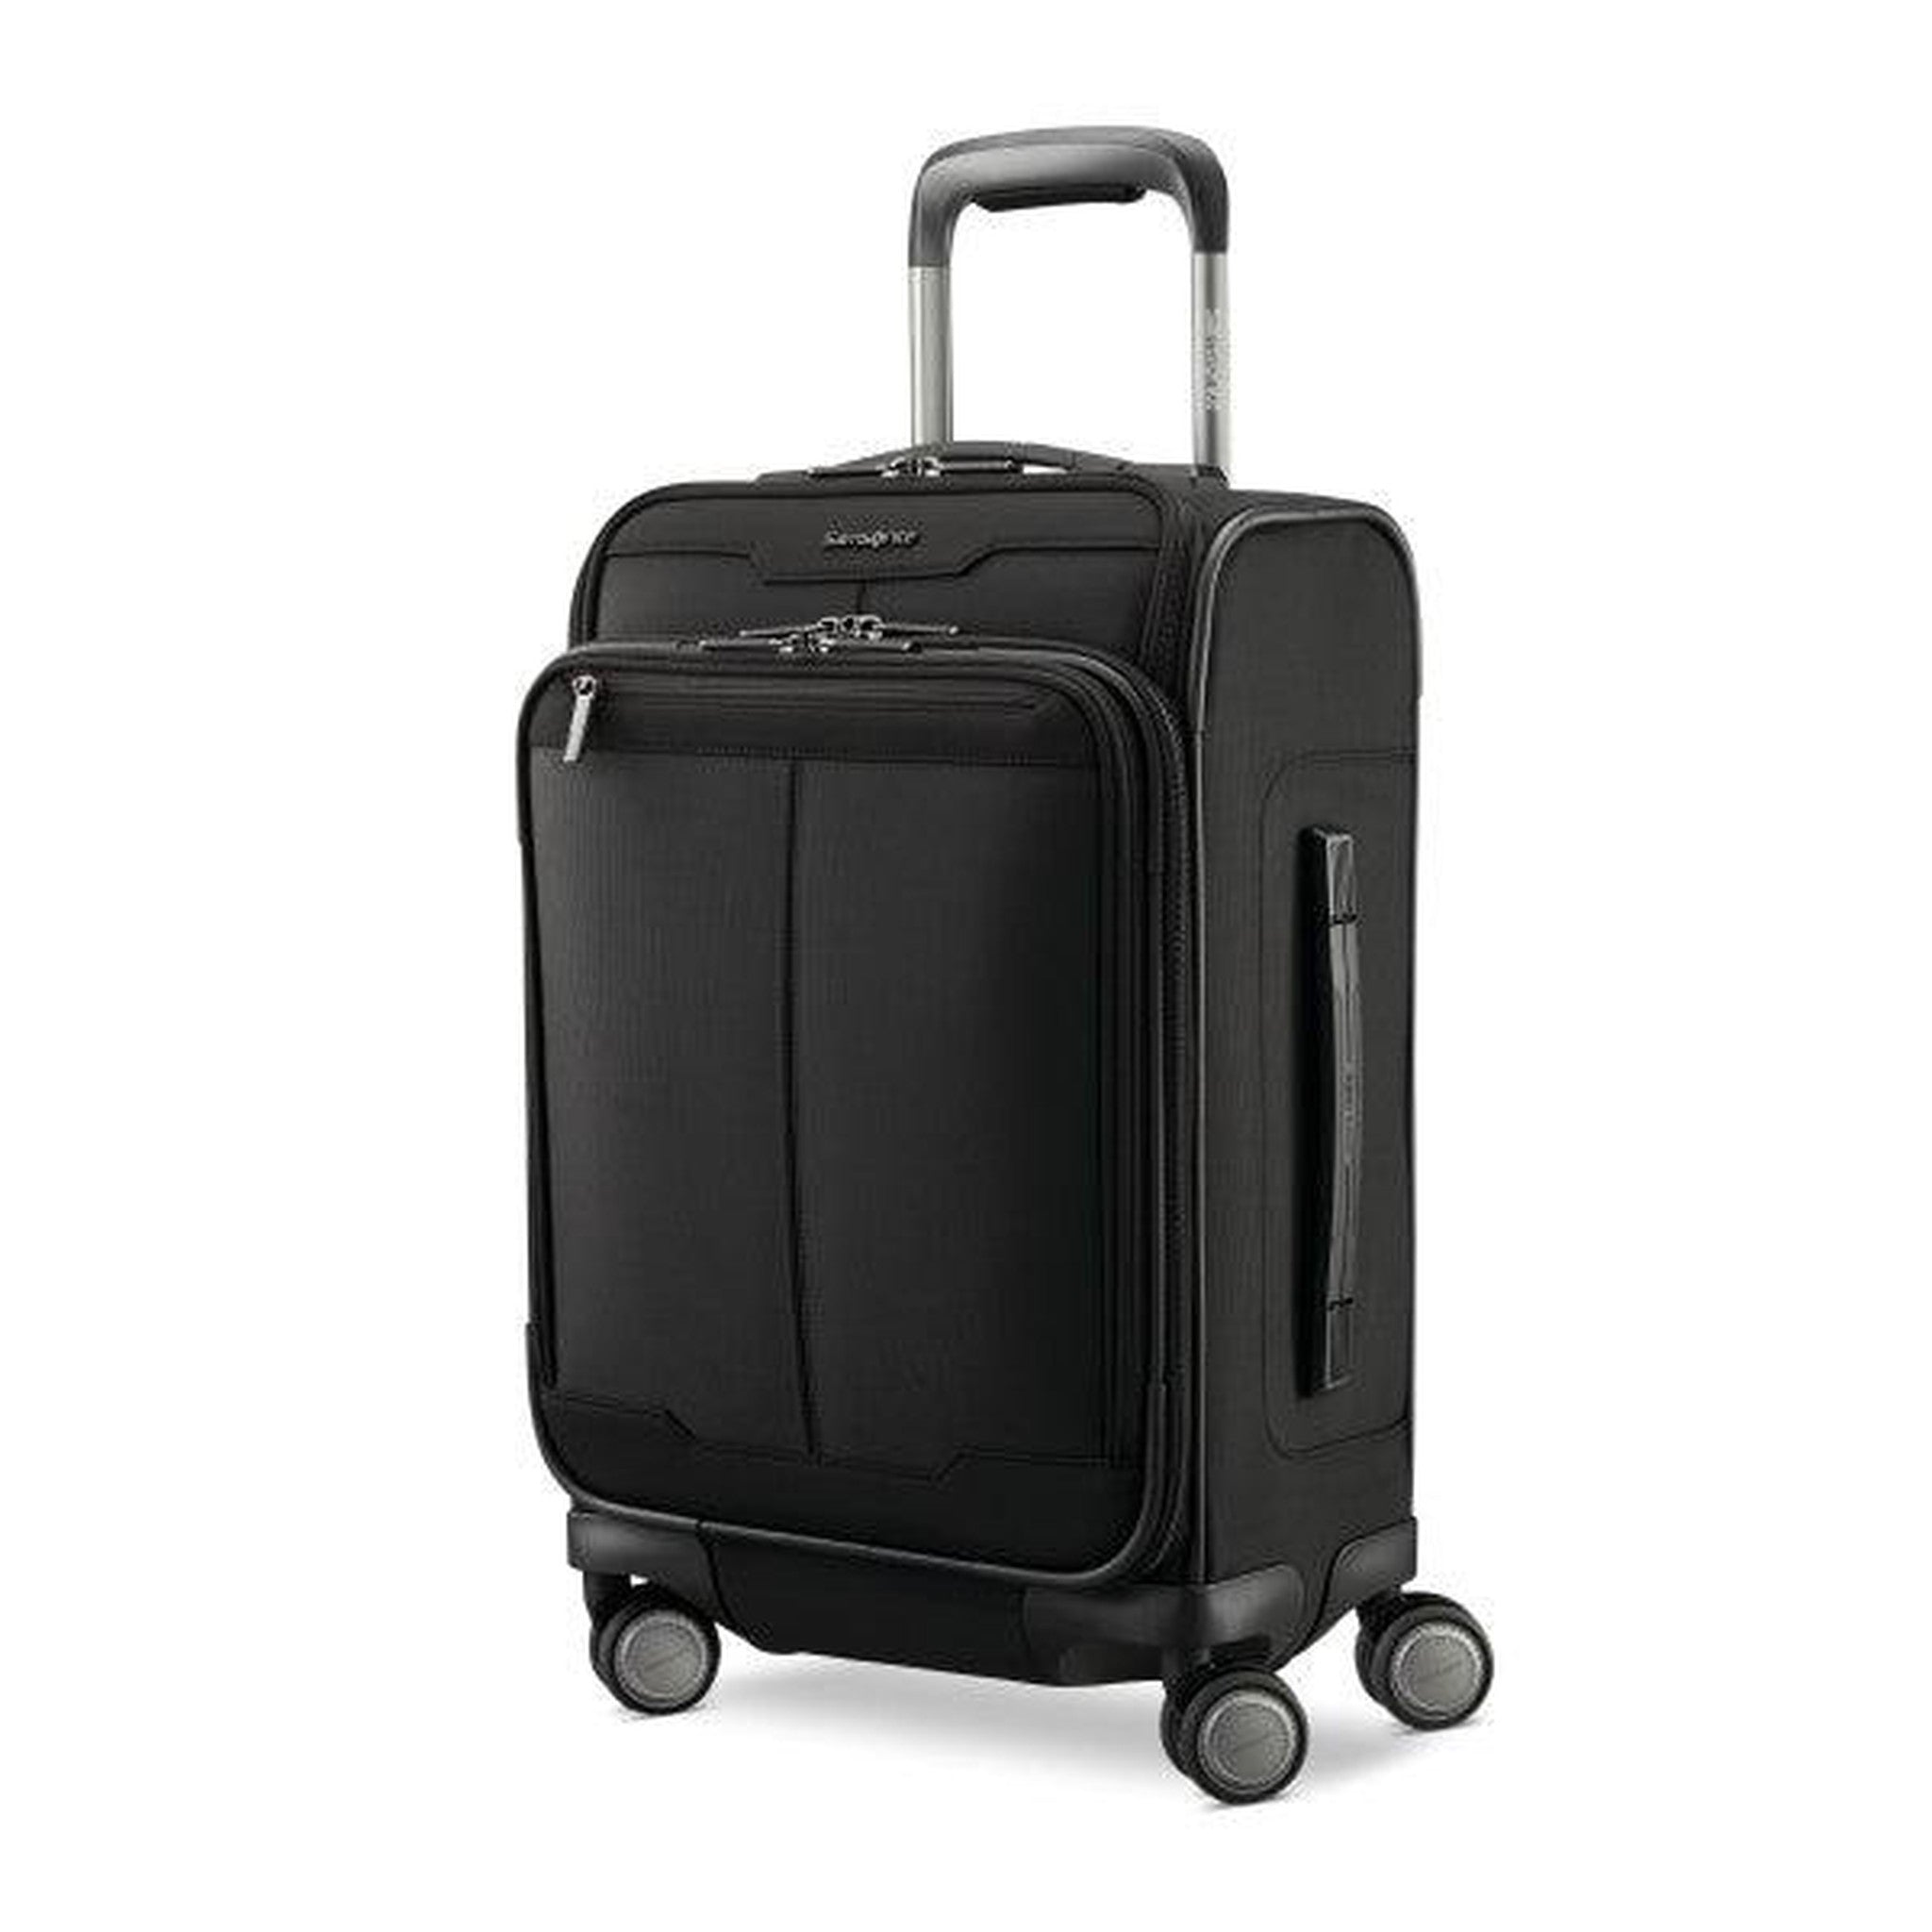 Samsonite Silhouette 17 Softside 22x14x9 Carry-On Spinner – Luggage Pros